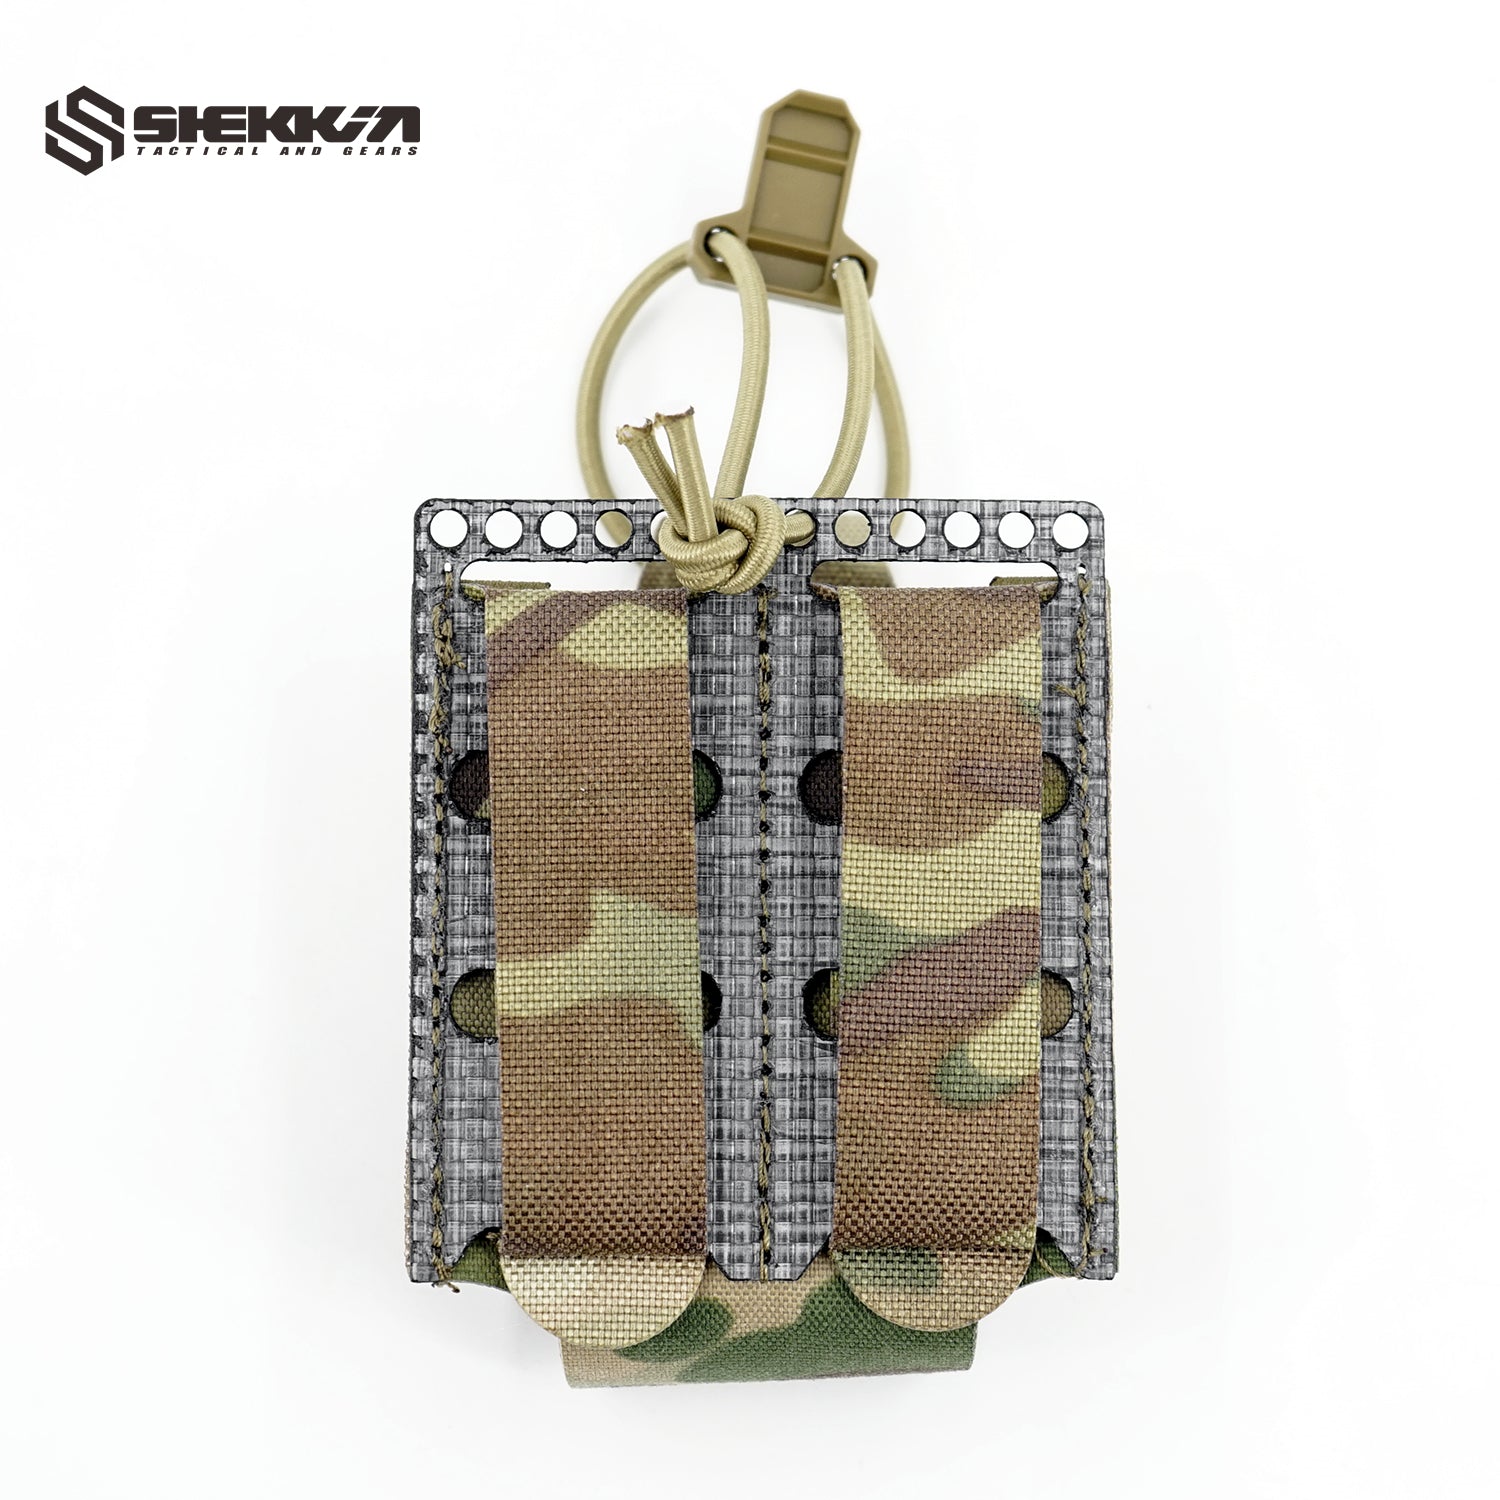 Single 556 m4 mag pouch with Tegris plate - Shekkin Gears